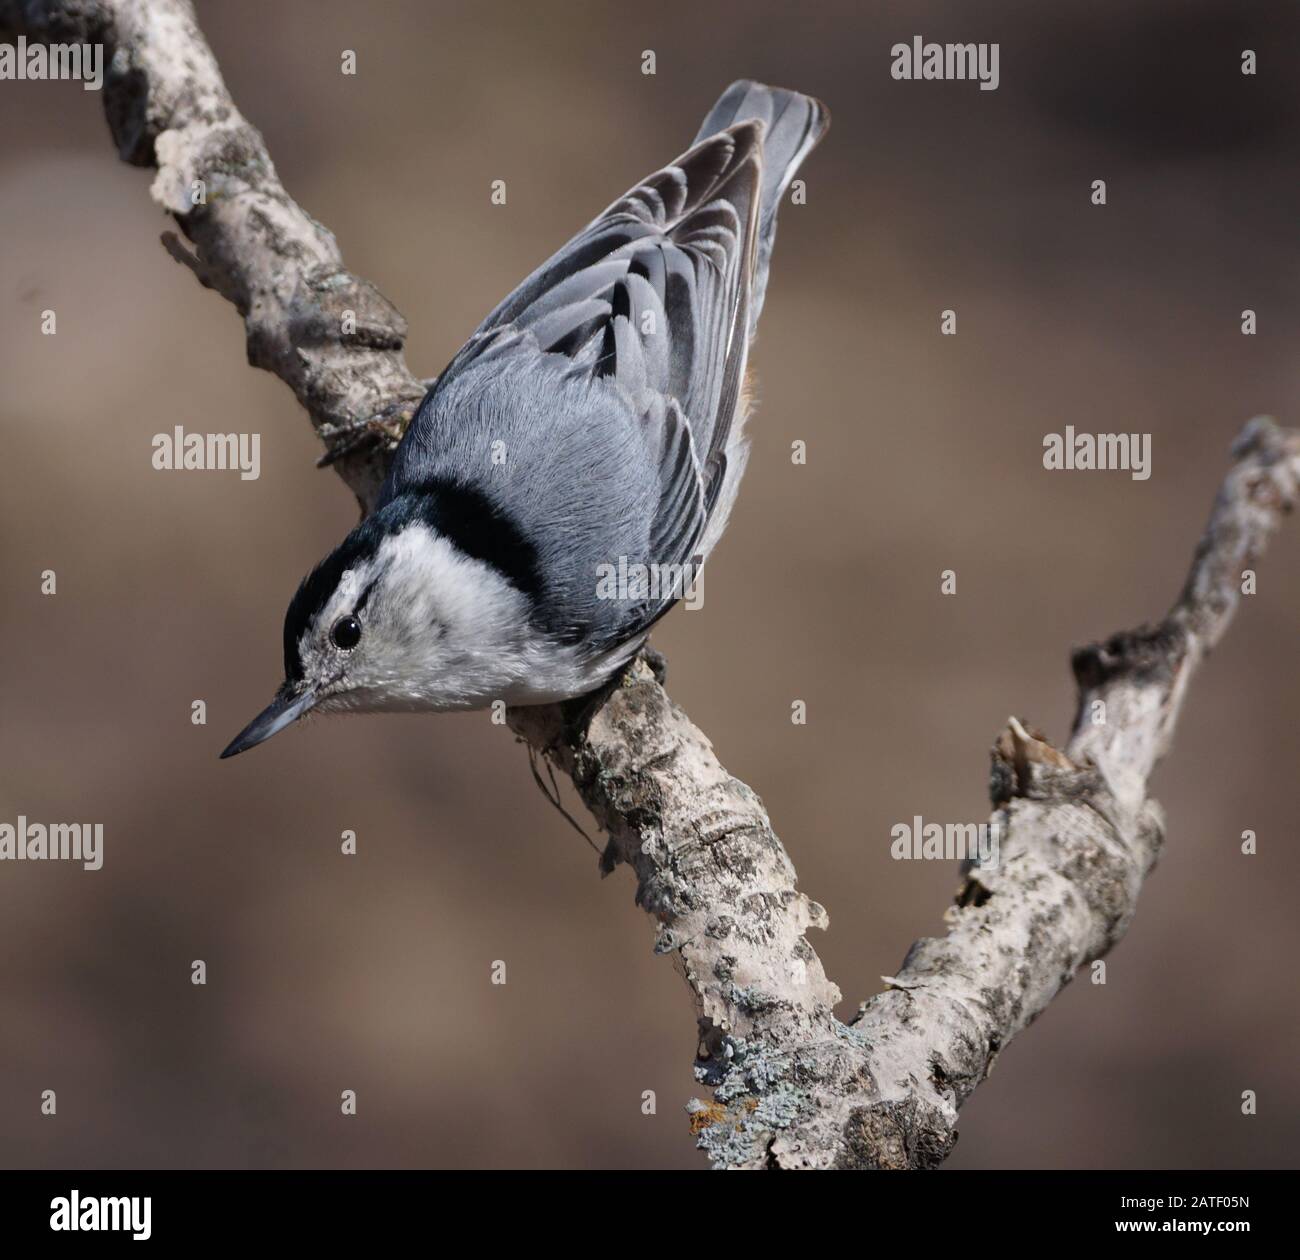 Close-up portrait of  nuthatch bird perched head down on a branch Stock Photo